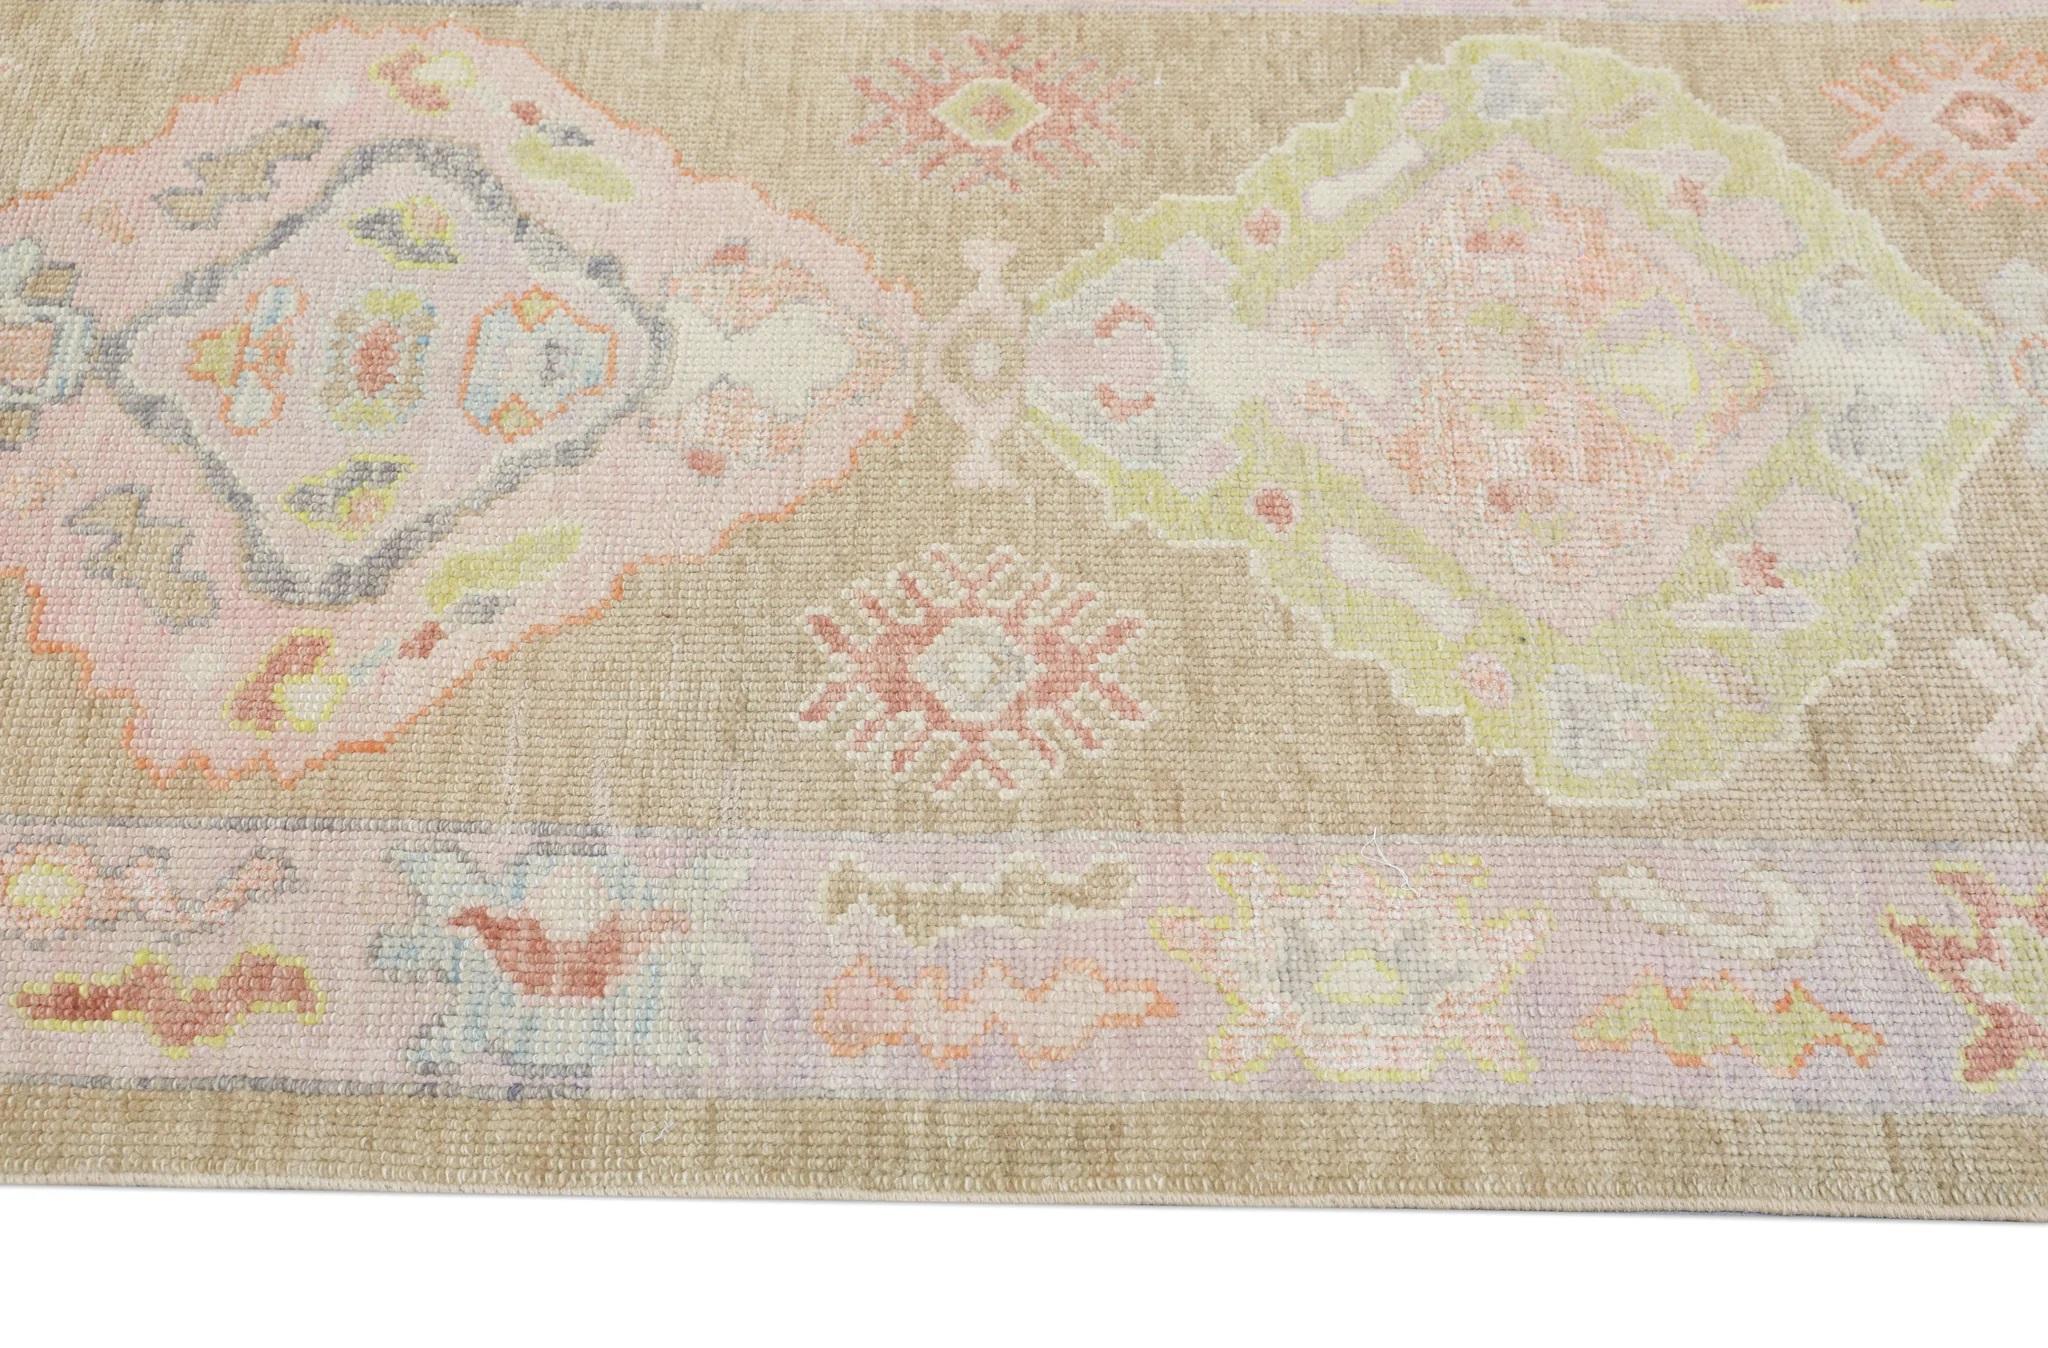 Colorful Handwoven Wool Turkish Oushak Rug with Pink Floral Design 3' x 9'6